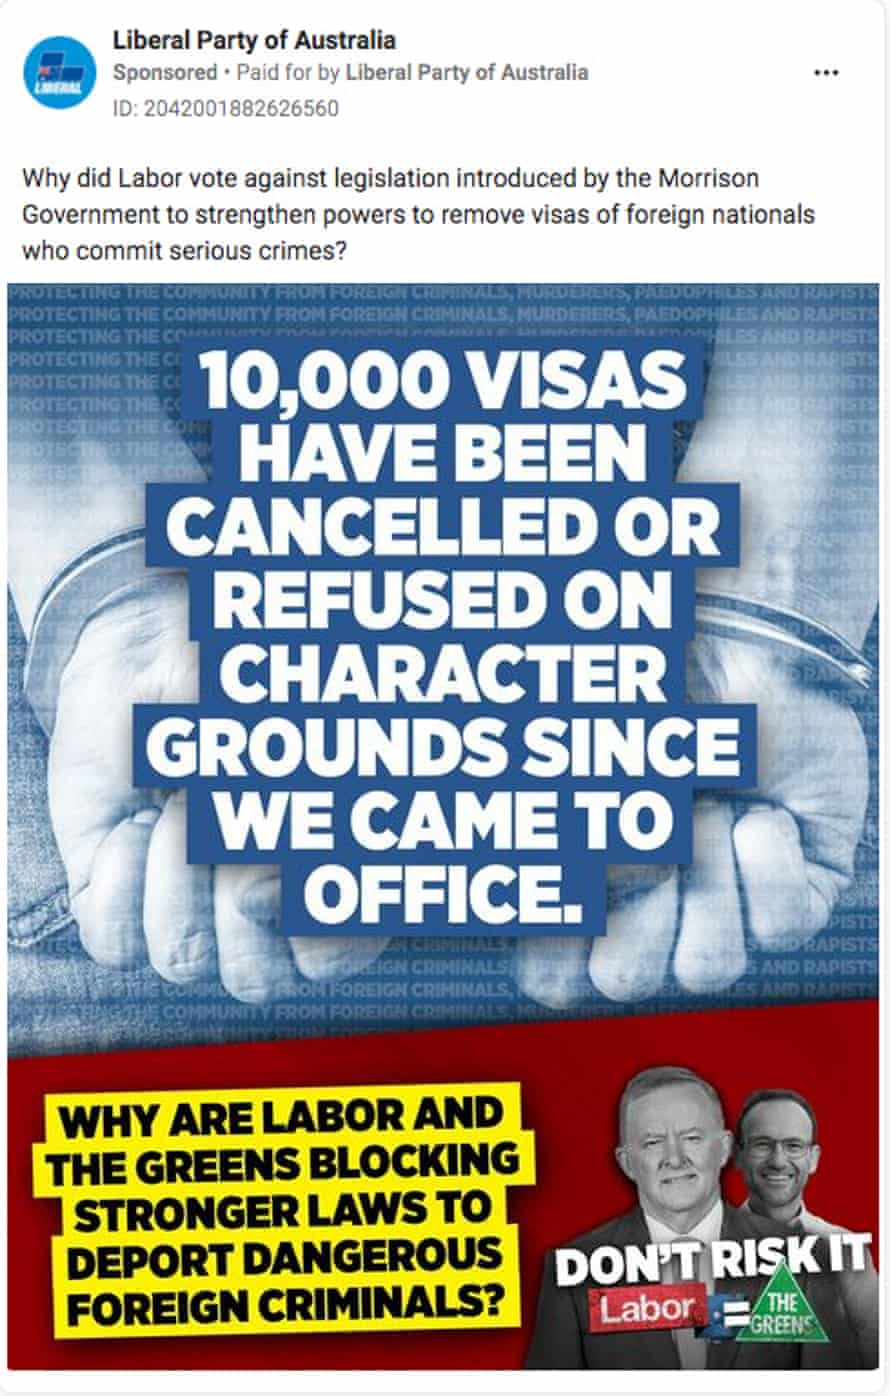 Liberal party ads running on Facebook about the character test